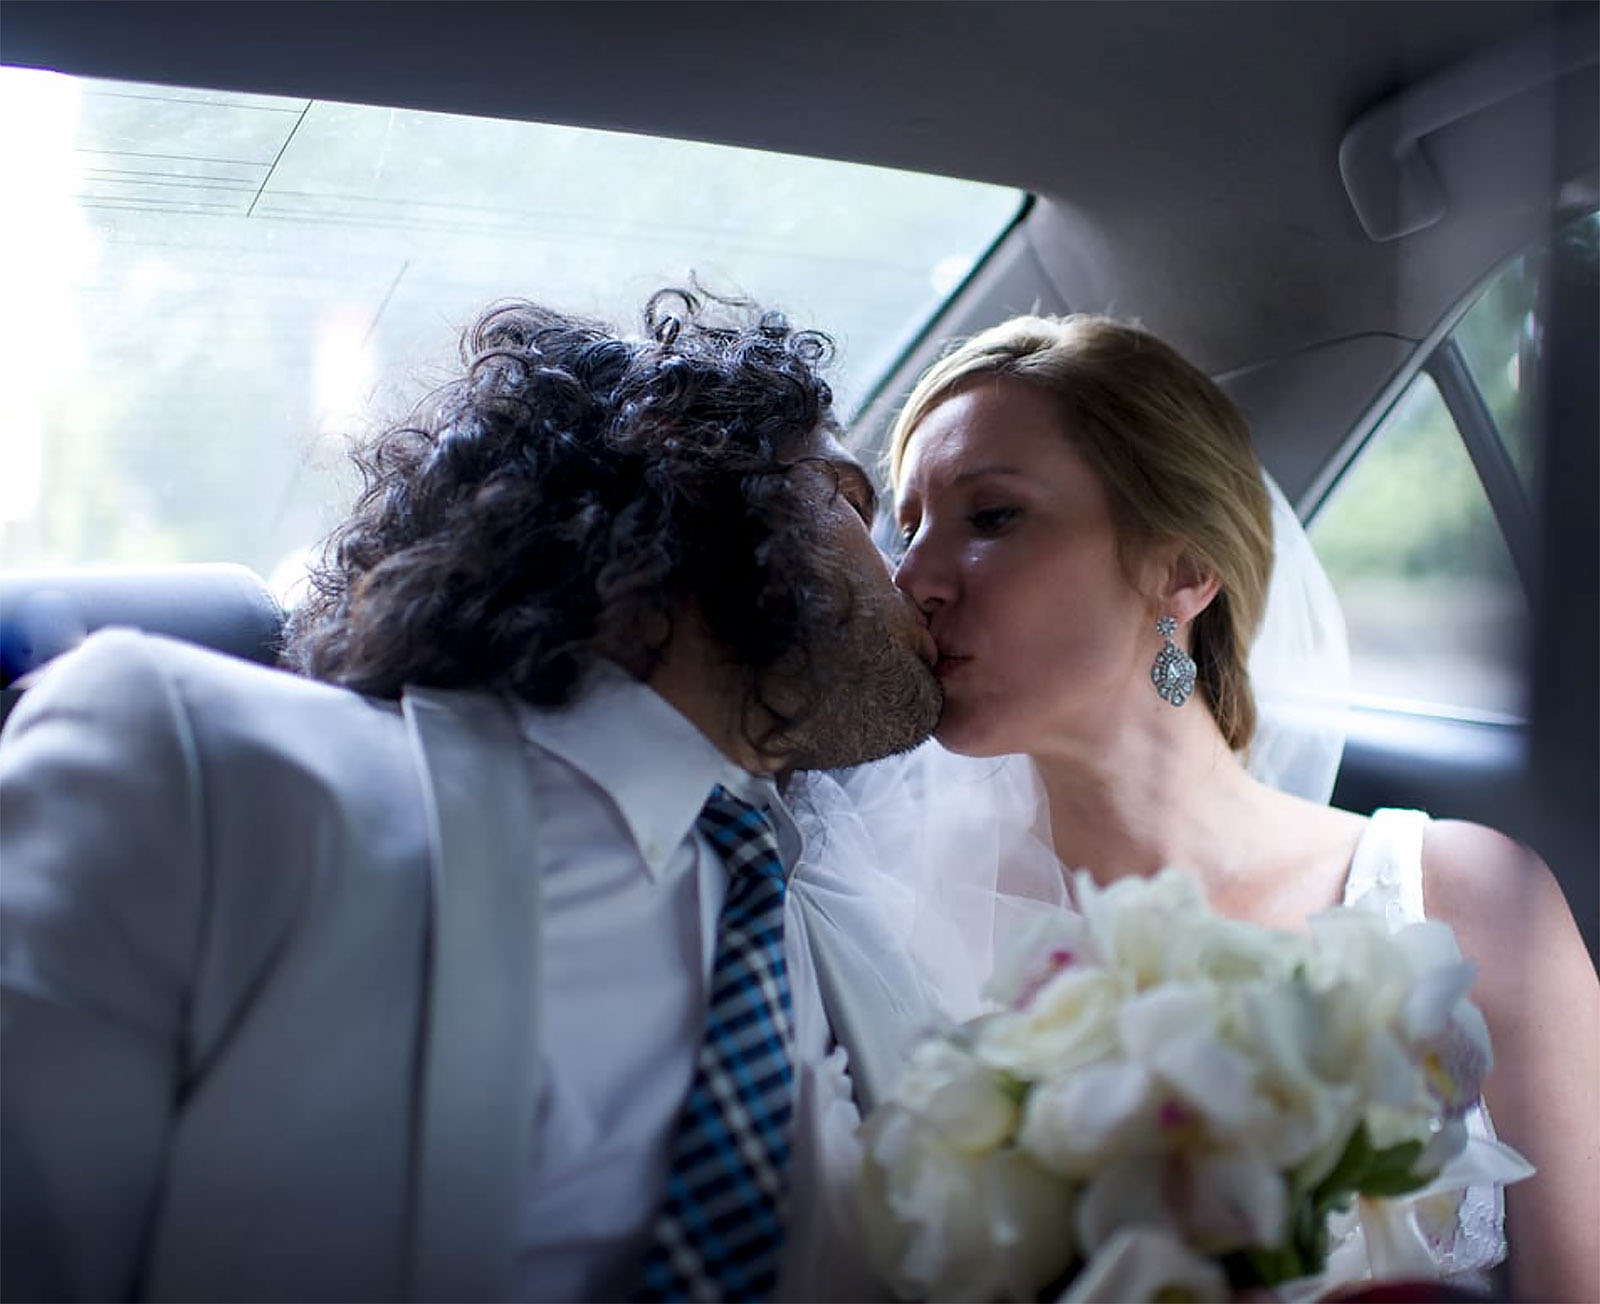 A Summer Bride kissing the groom in the backseat of cab